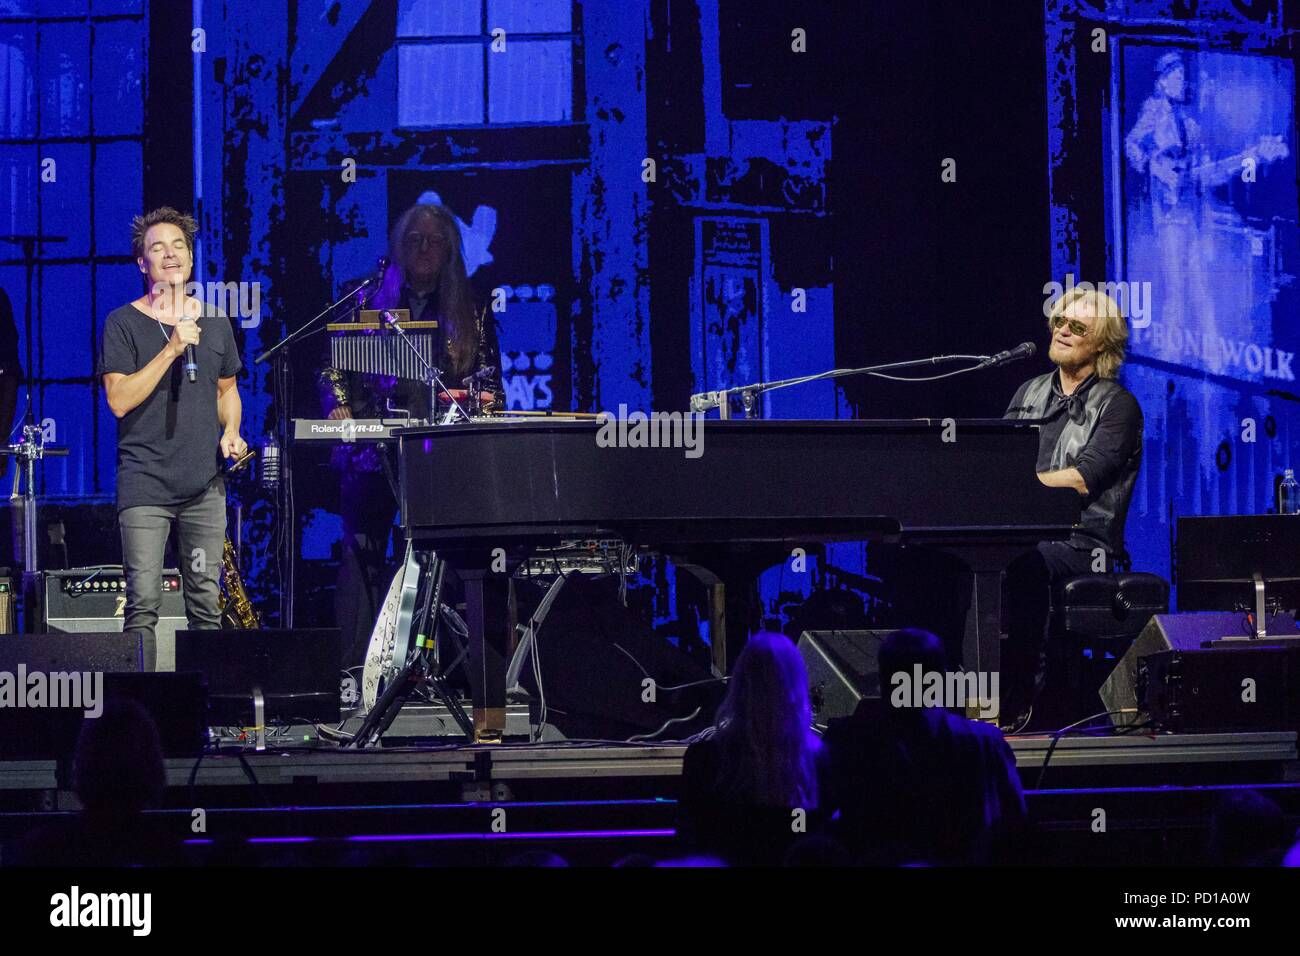 San Diego, California, USA. 4th Aug, 2018. PAT MONAHAN of Train joins DARYL HALL and JOHN OATES at Viejas Arena in San Diego, California on August 5, 2018 Credit: Marissa Carter/ZUMA Wire/Alamy Live News Stock Photo